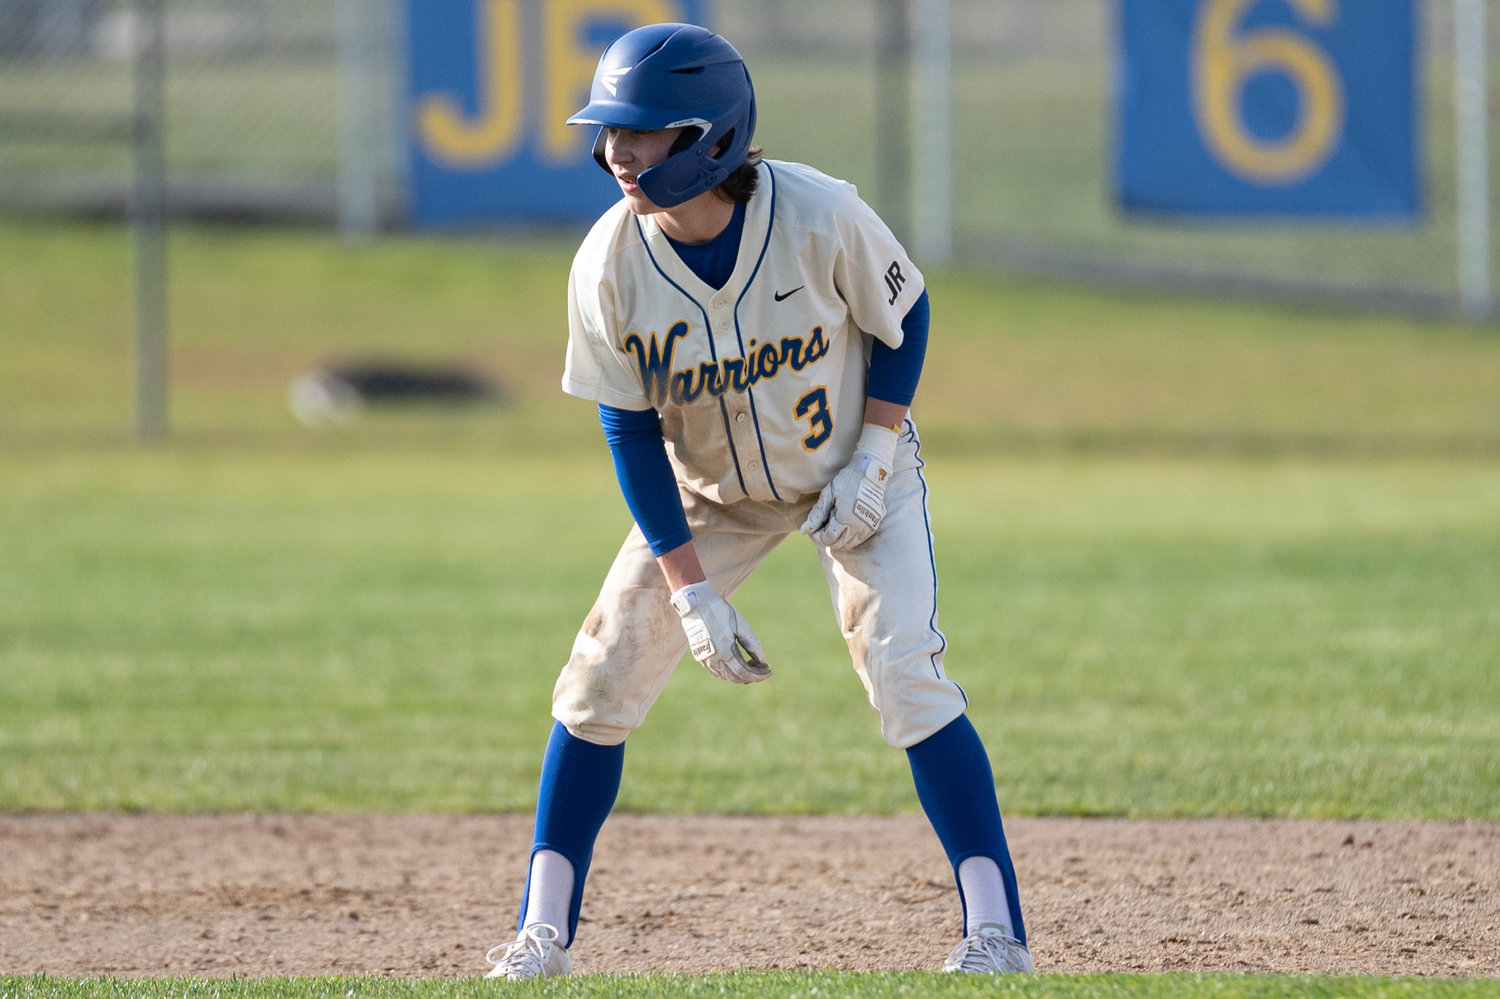 Rochester's Mason Ubias takes a look at the plate from second base against Shelton April 7.